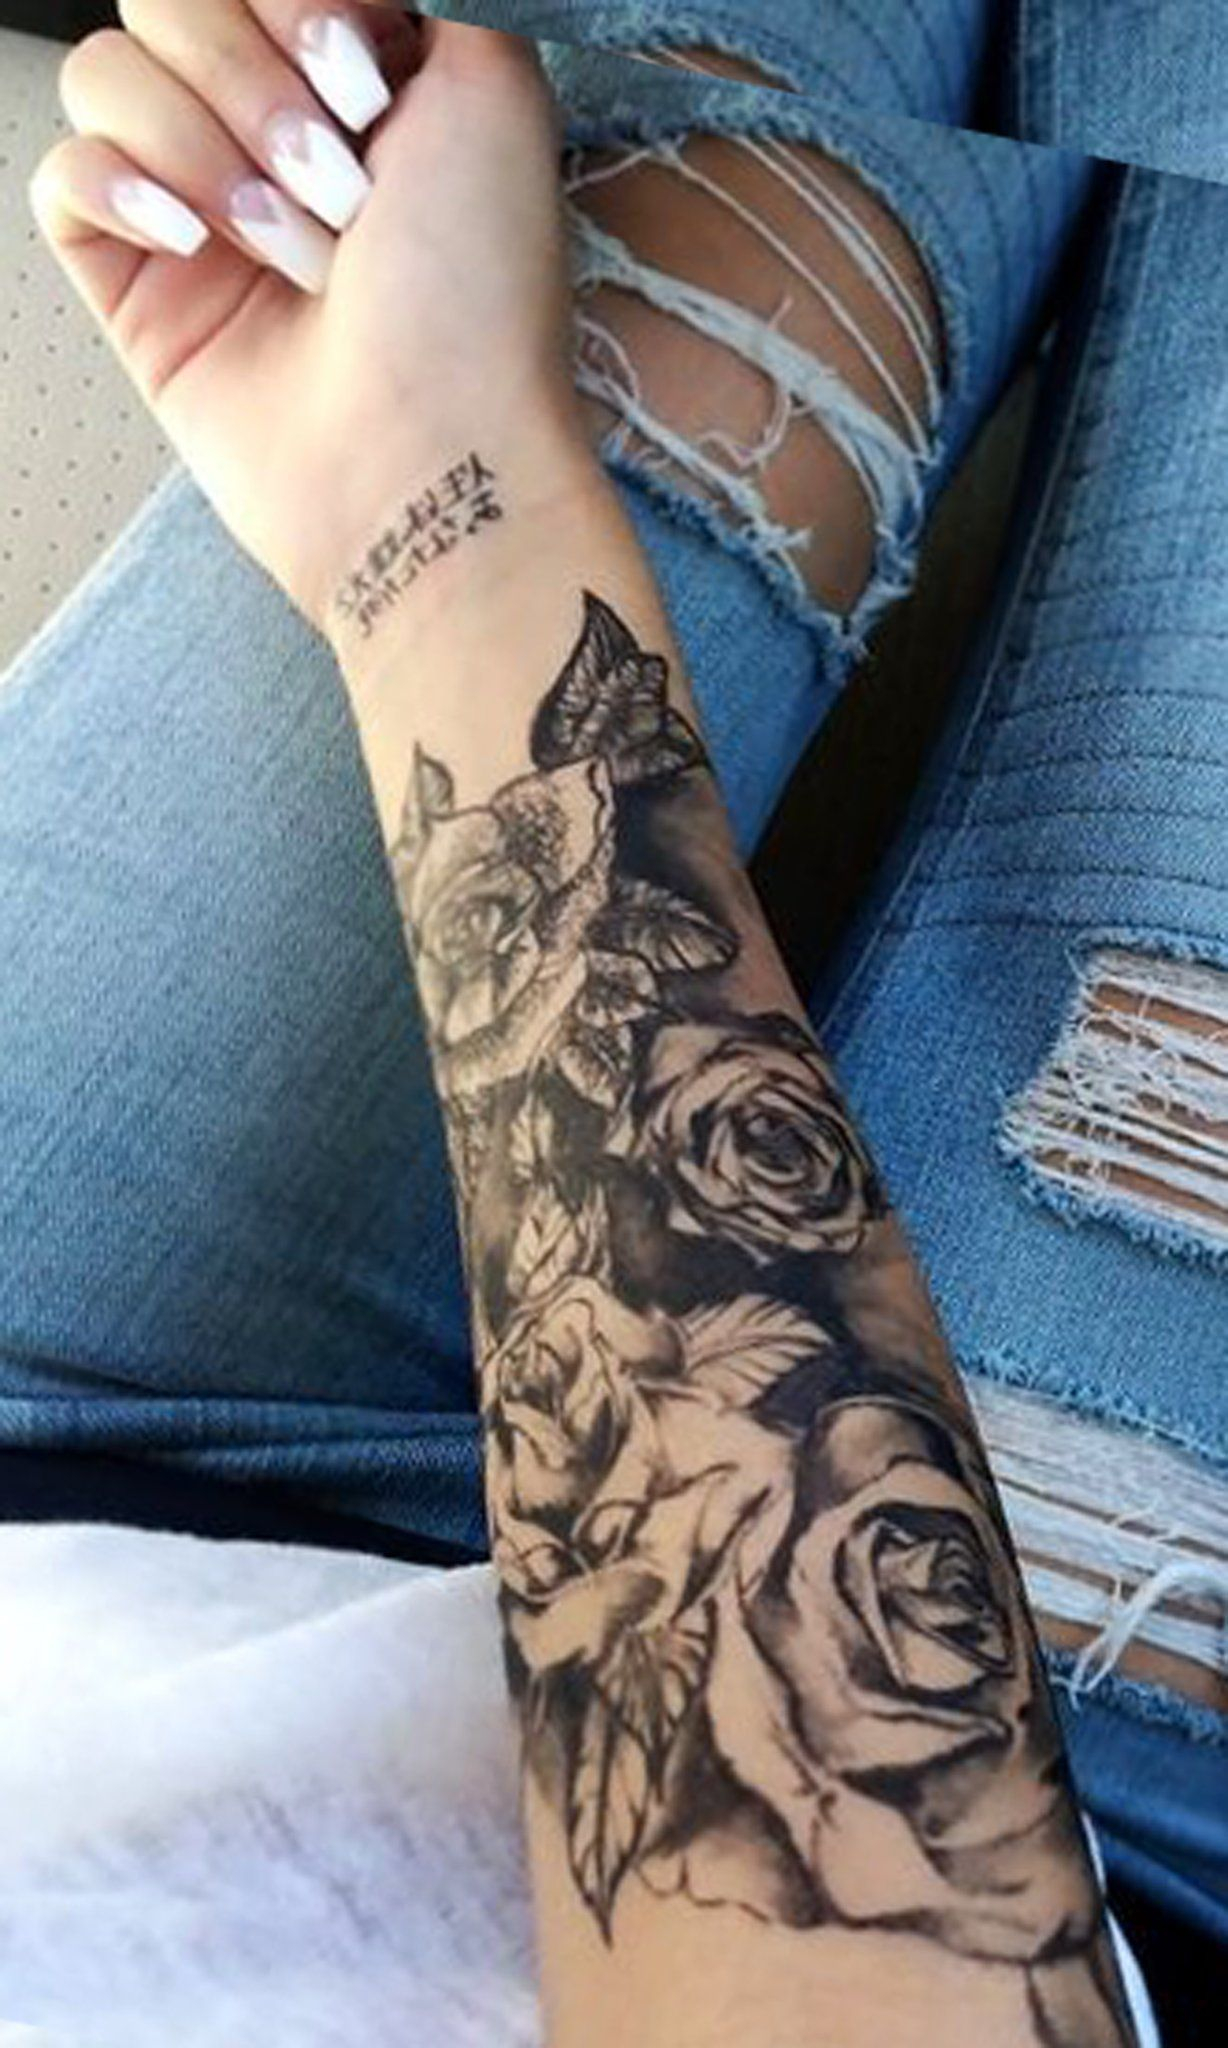 Black Rose Forearm Tattoo Ideas For Women Realistic Floral Flower with dimensions 1228 X 2048